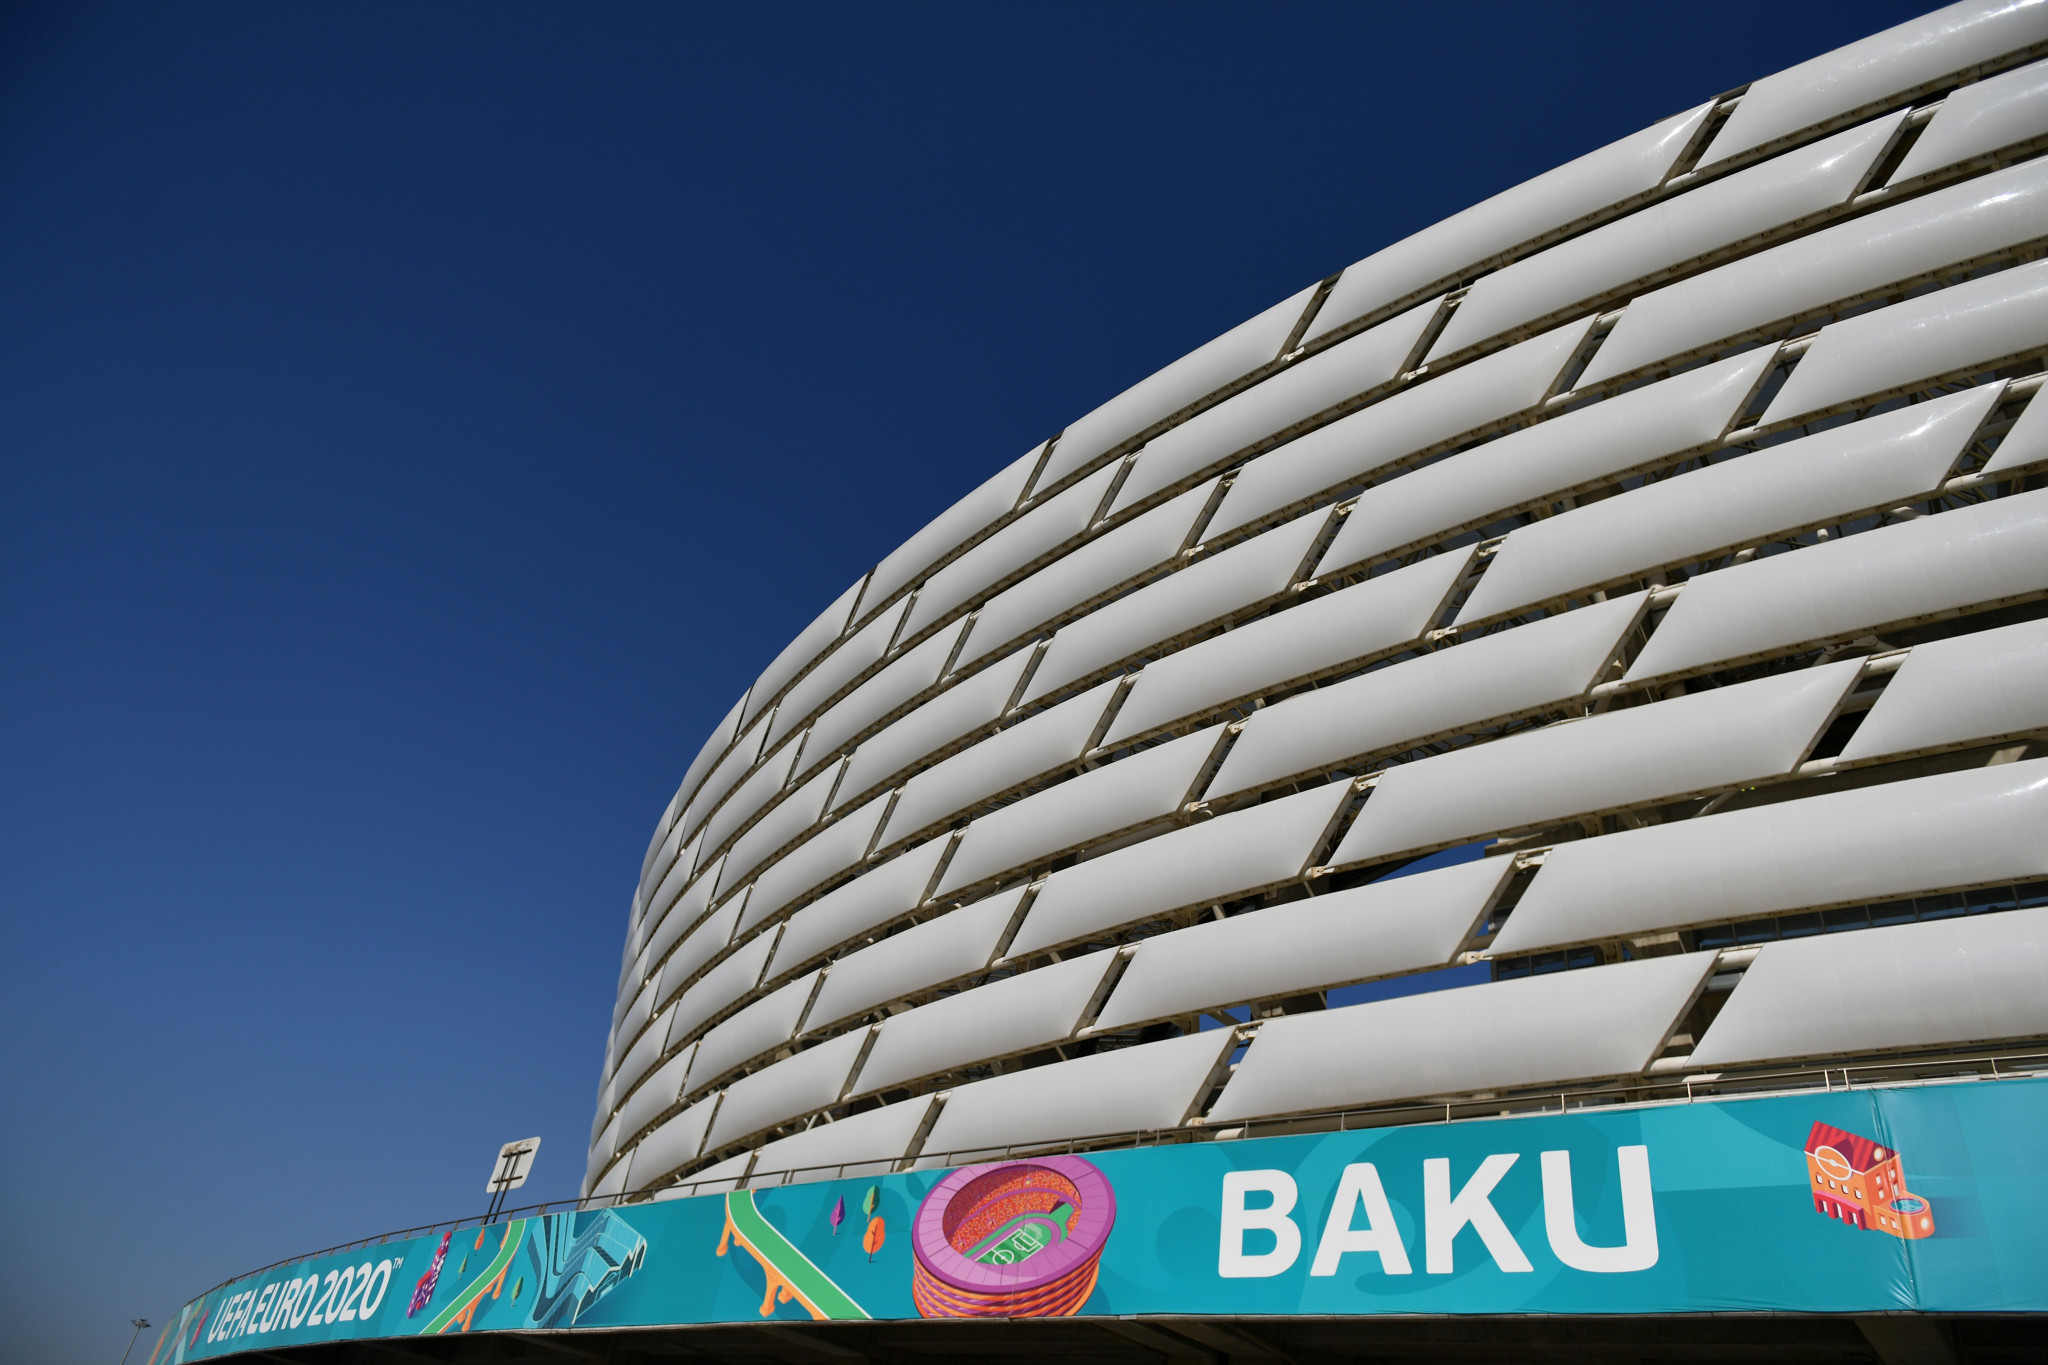 Baku staged four matches at Euro 2020 ©Getty Images